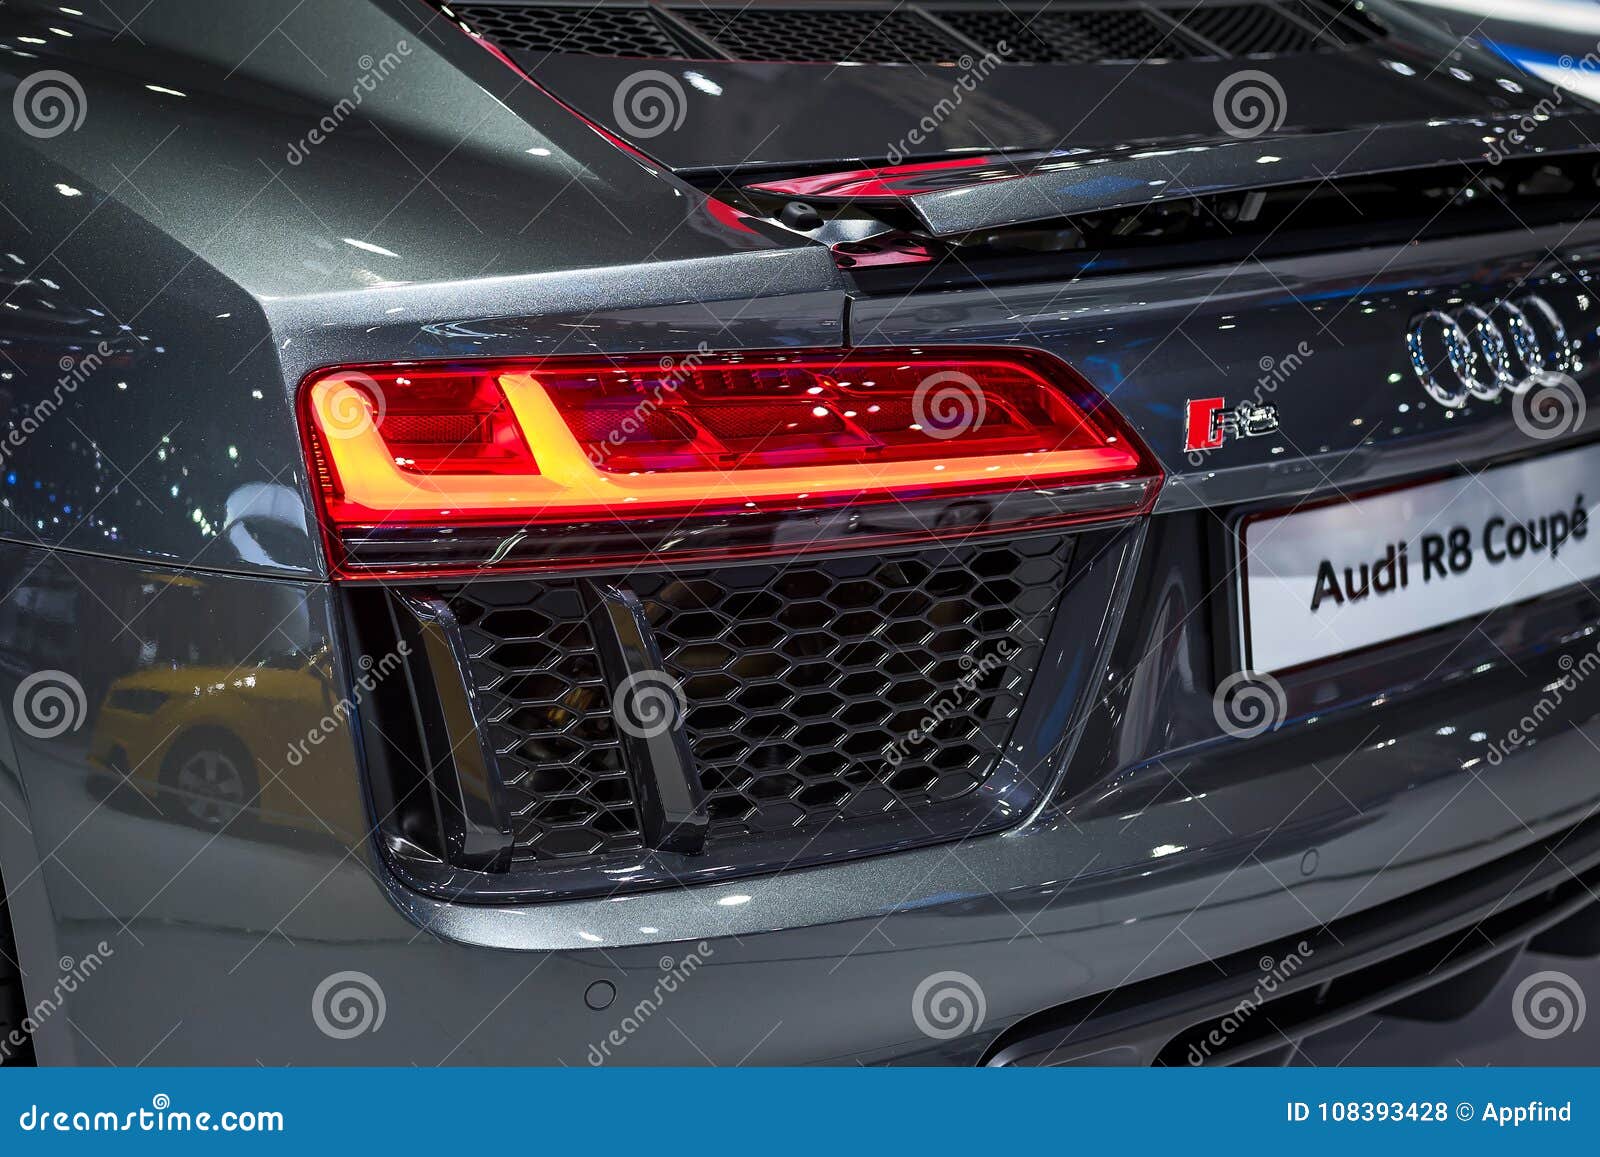 Audi Coupe car. editorial photo. Image of - 108393428